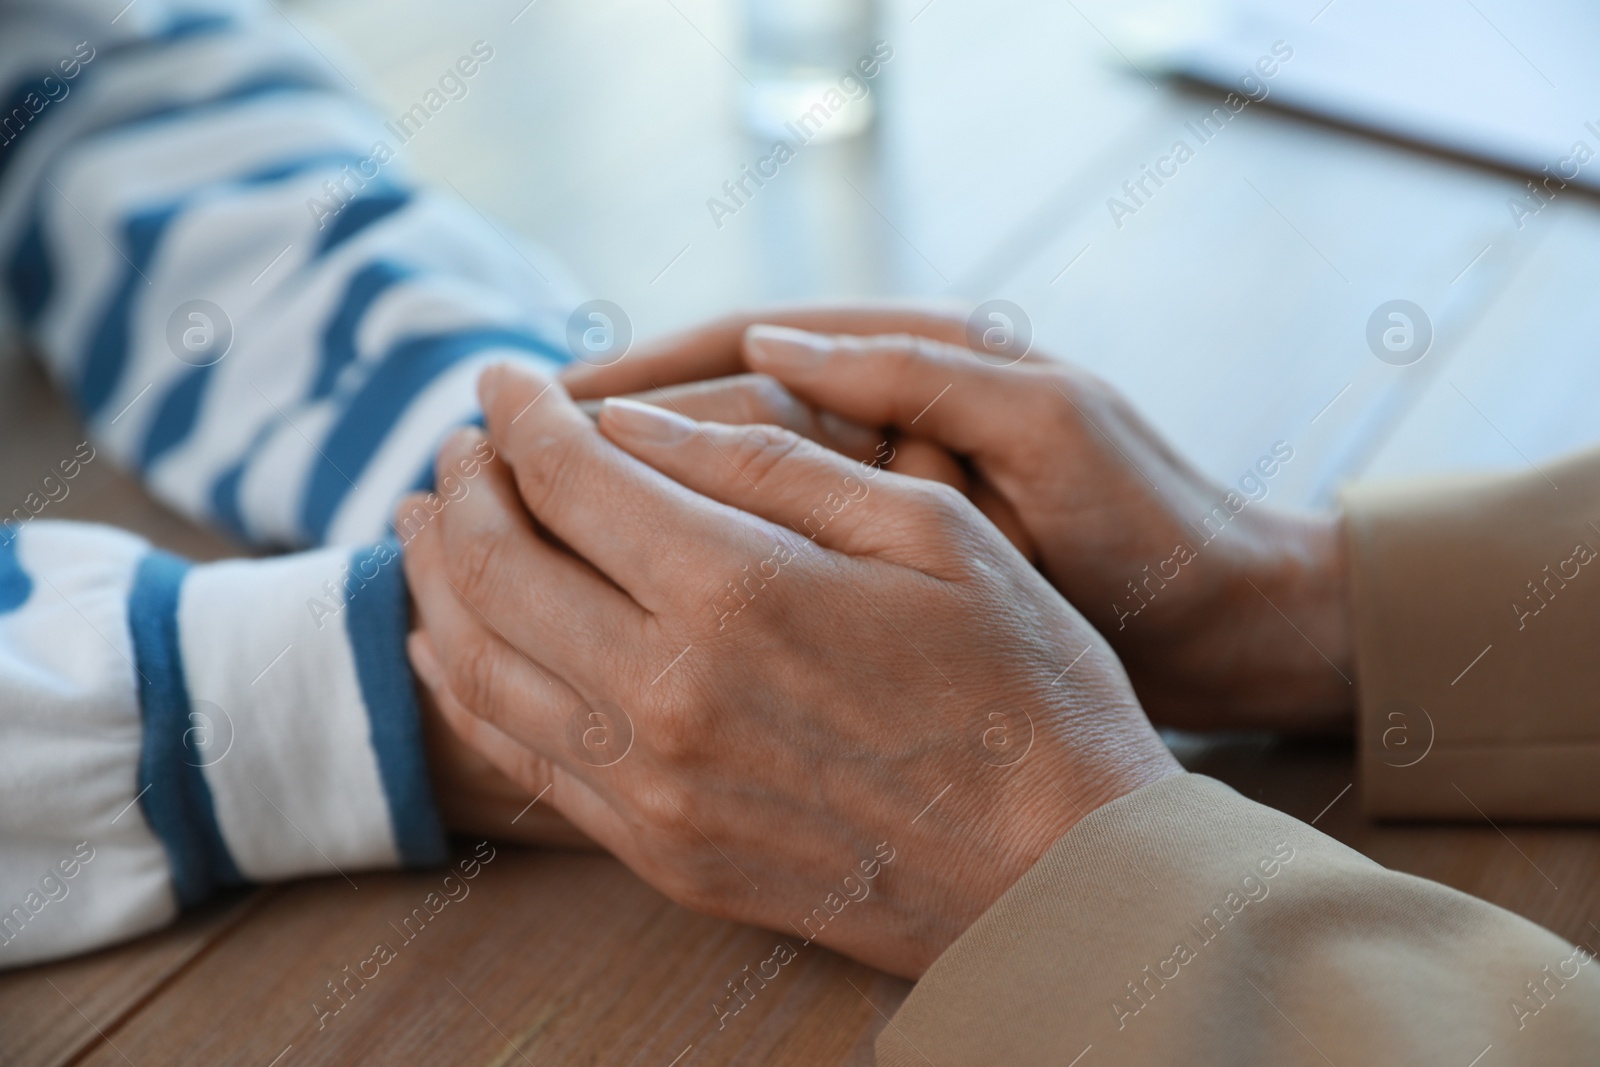 Photo of Psychotherapist holding patient's hands at table indoors, closeup